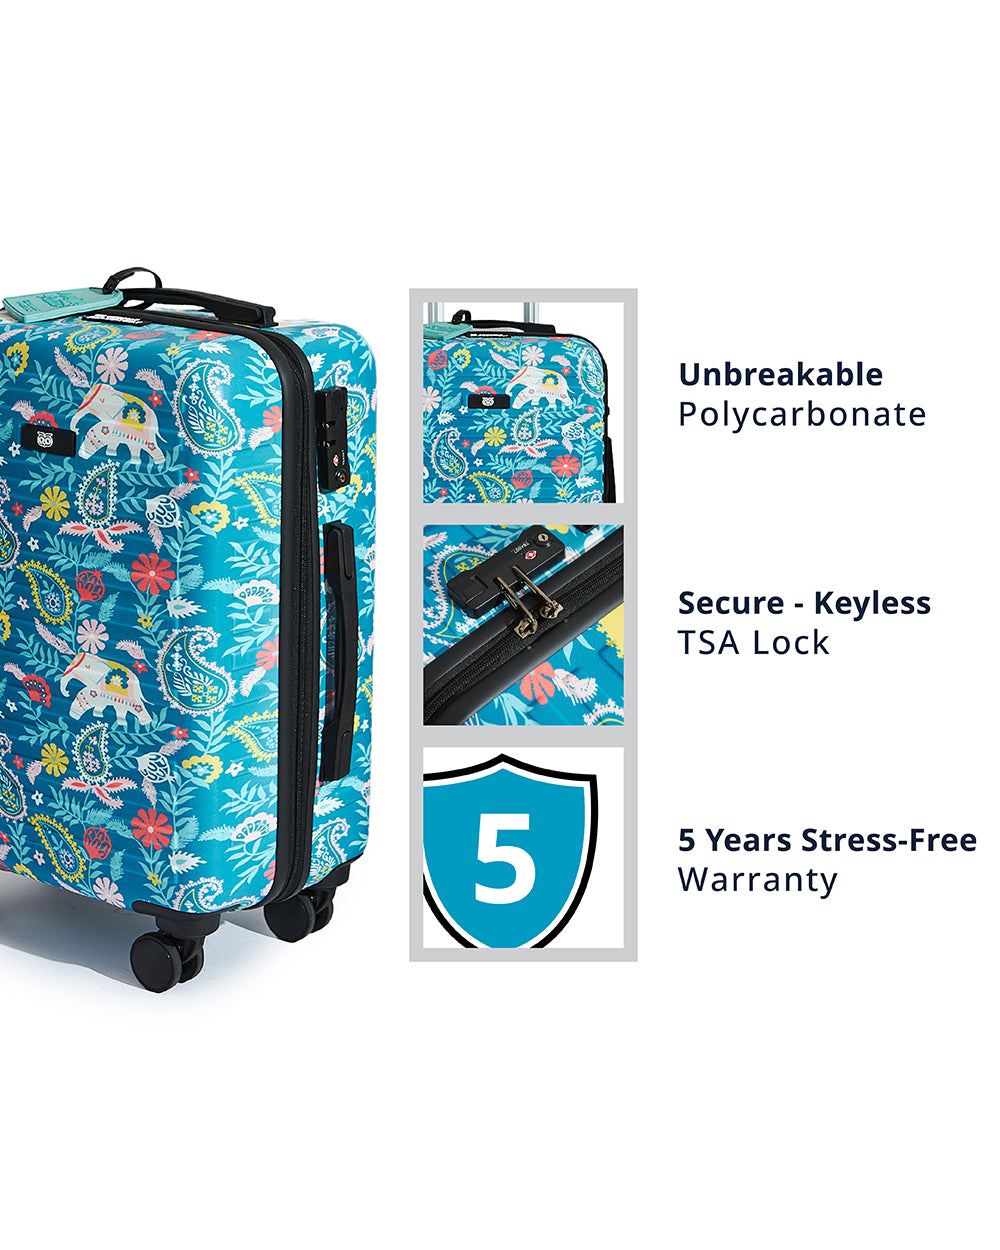 Paisley Tusker Luggage, Set of 2 | Cabin + Check-in